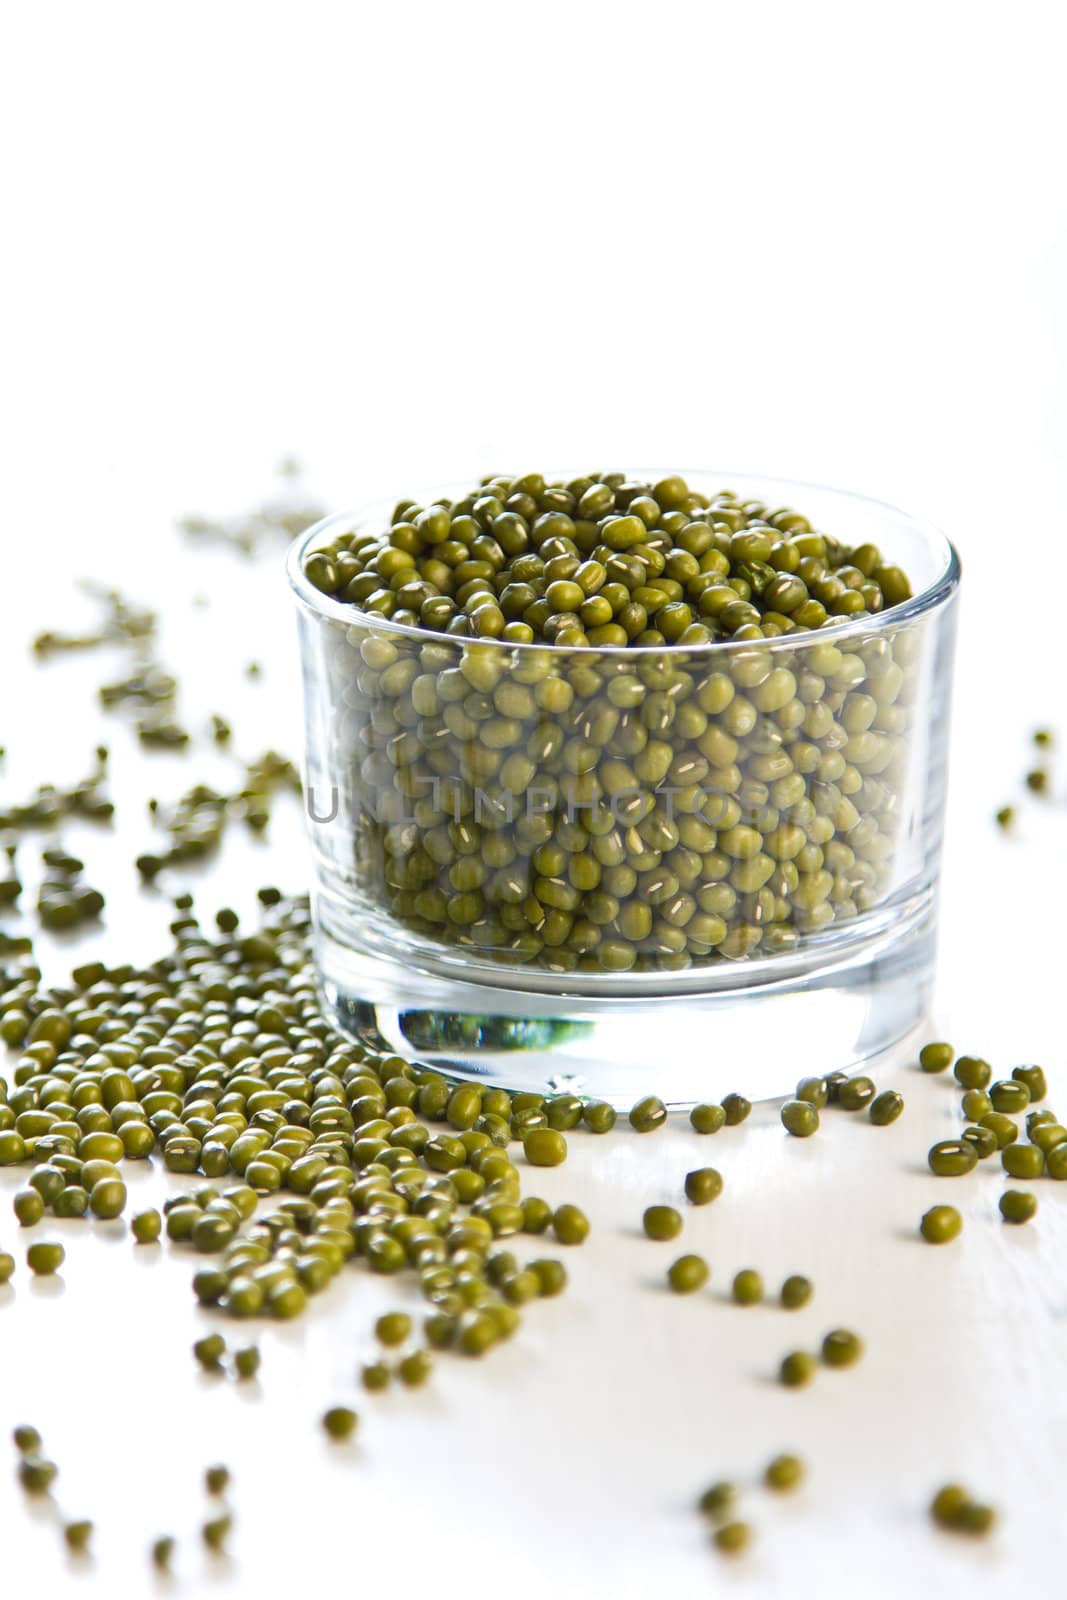 Mung beans [ green gram or golden gram] is used in both savory and sweet dishes